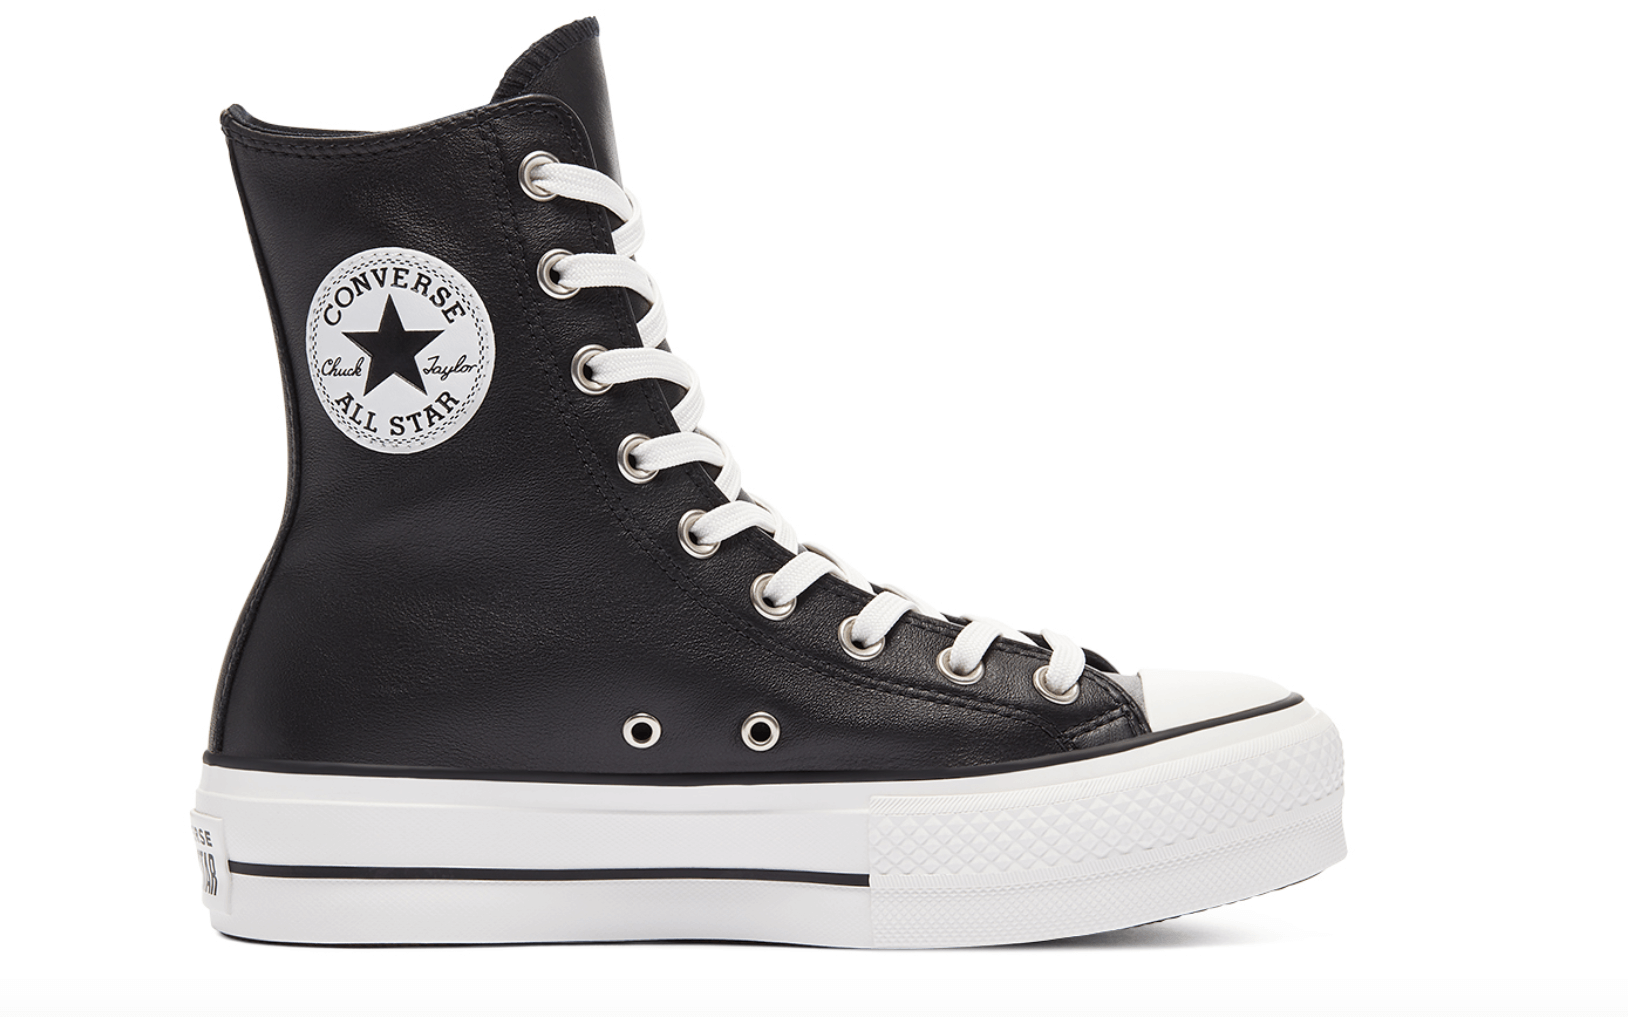 Sneakers Converse Extra High Platform Chuck Taylor All Star High Top color negro